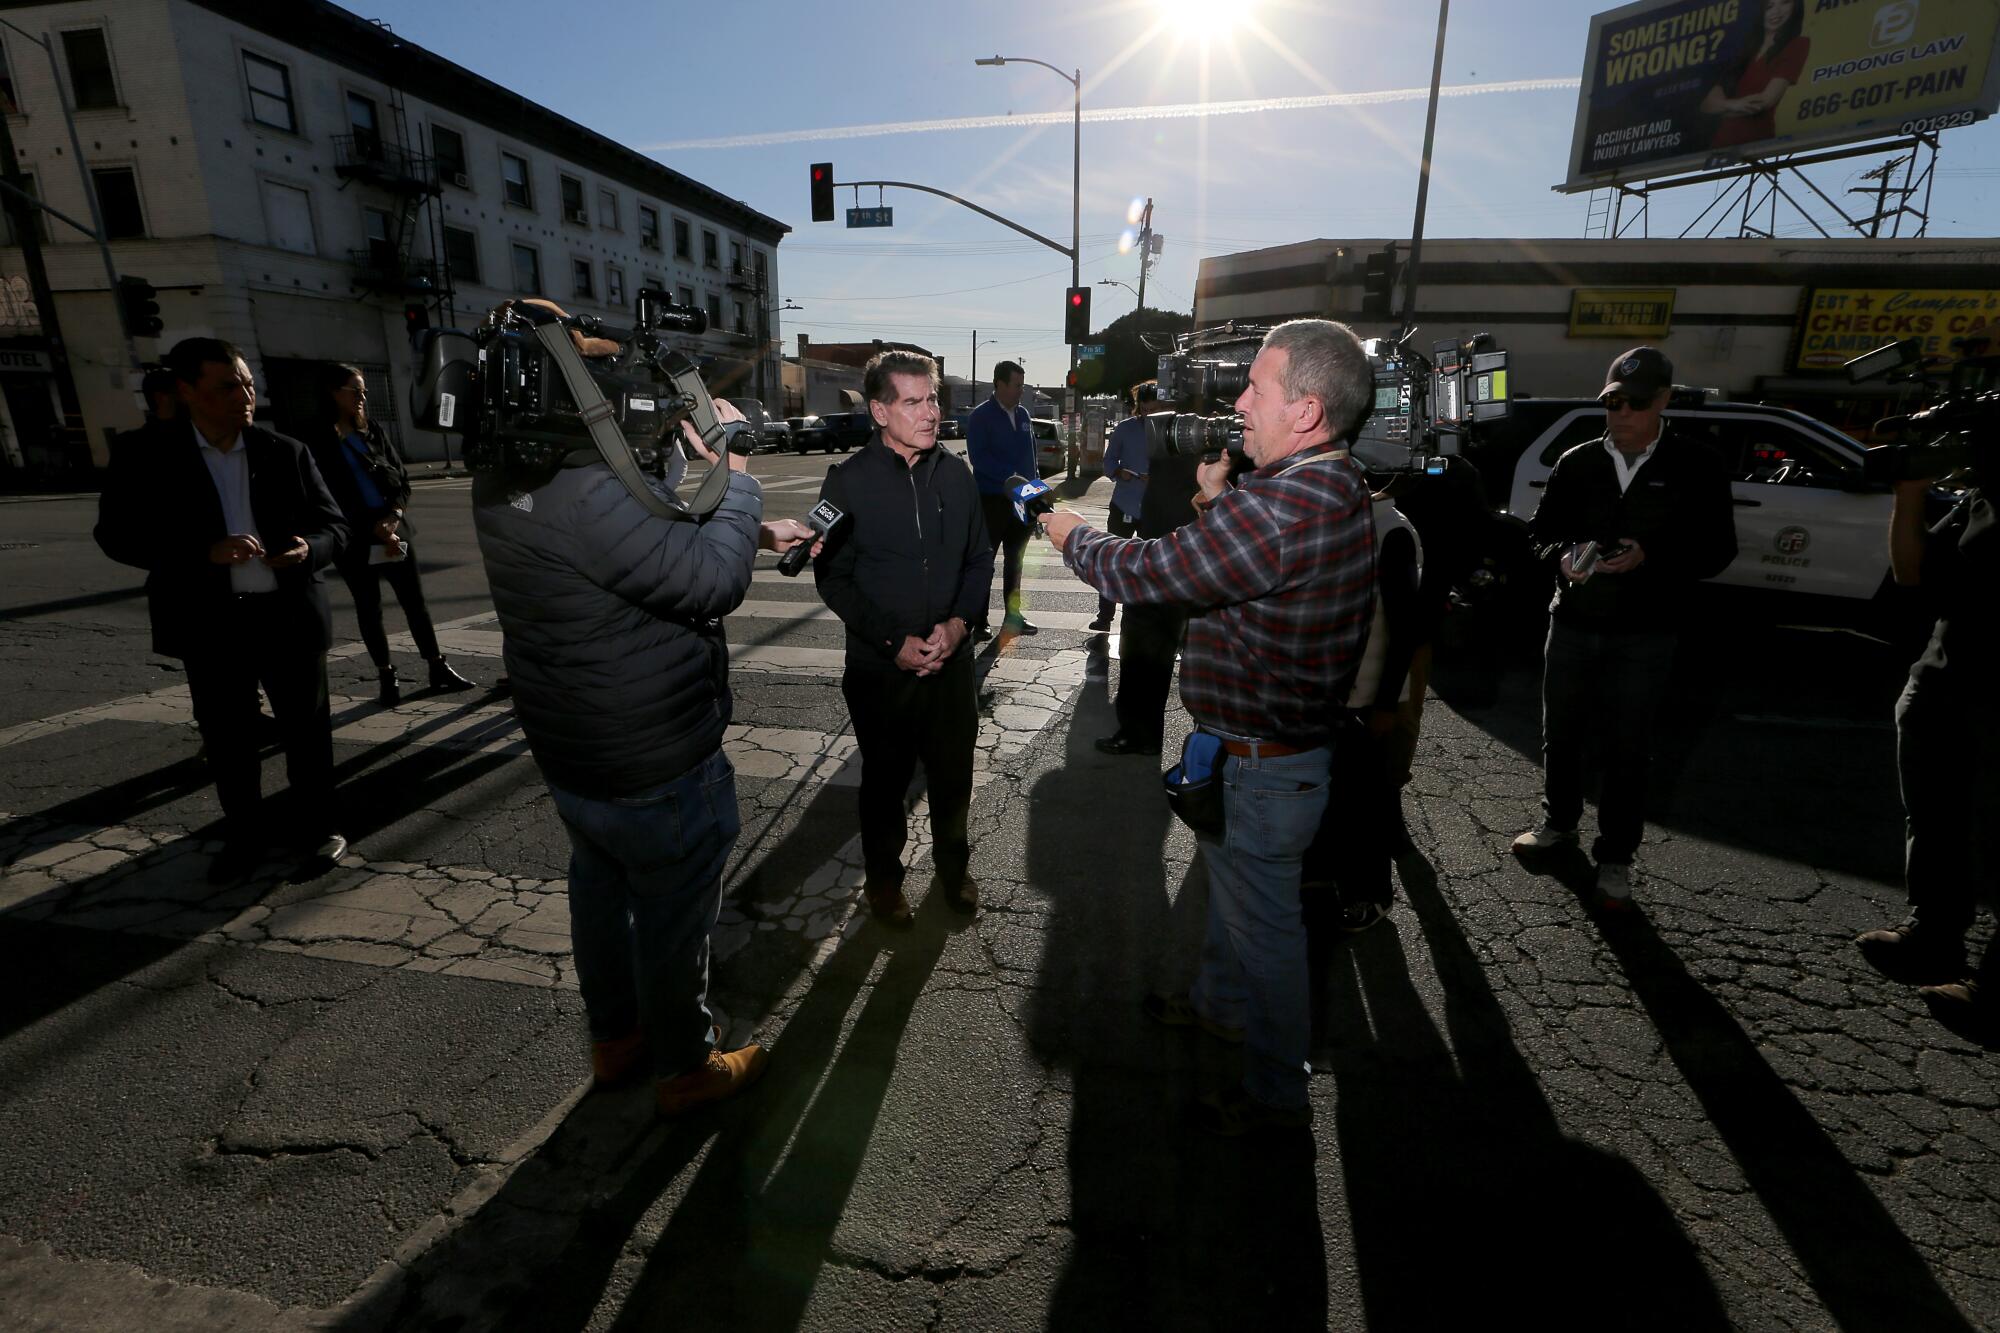 News cameras trail Dodgers great Steve Garvey during his visit to Skid Row in Los Angeles.